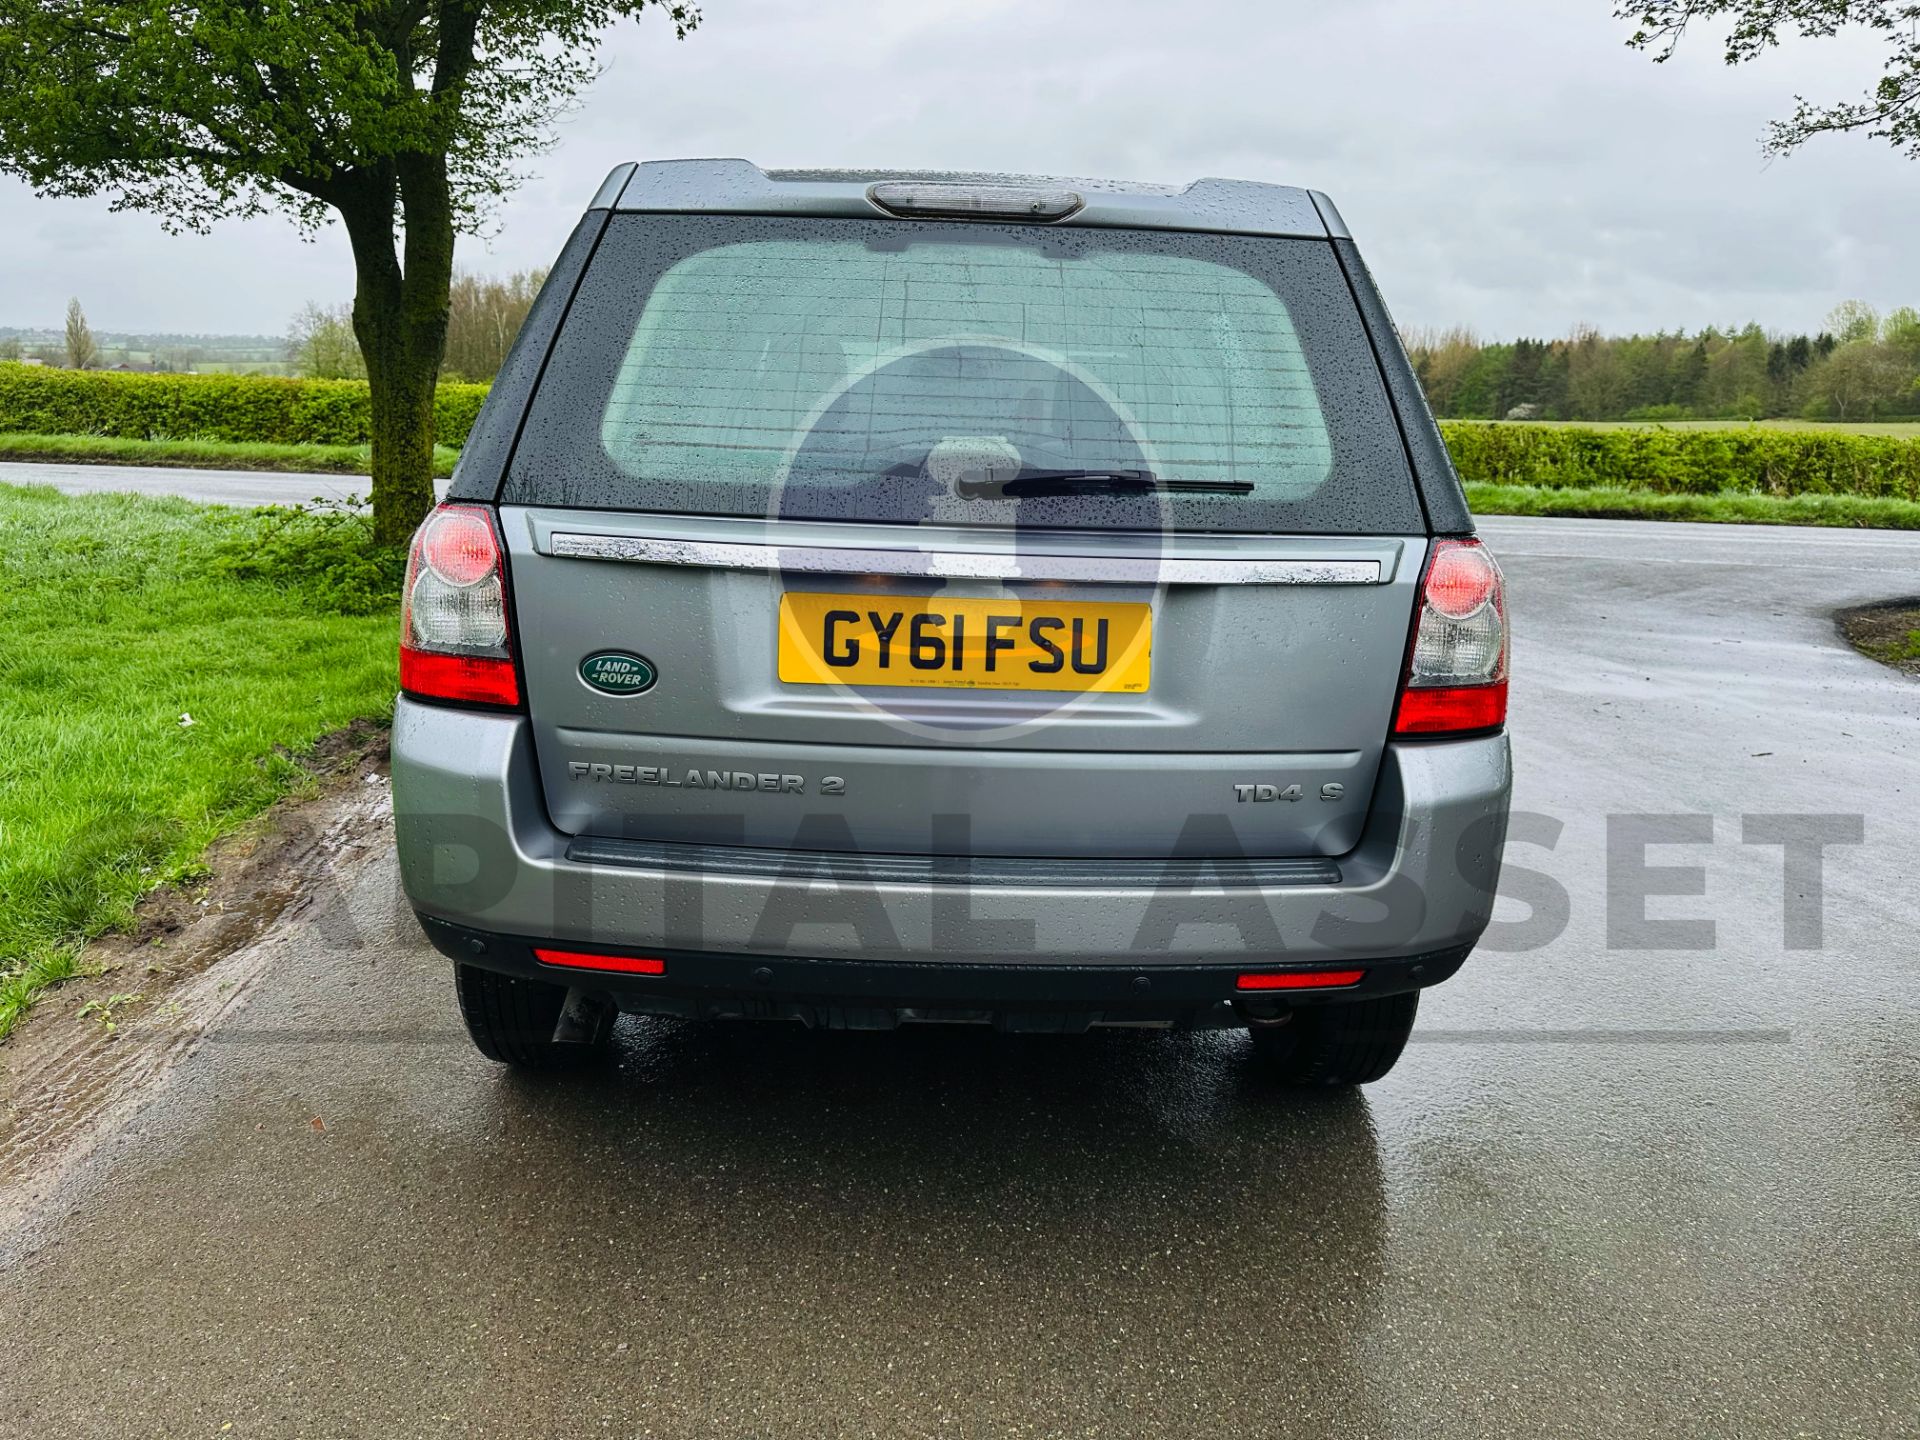 (ON SALE) LANDROVER FREELANDER 2.2TD4 S EDITION "AUTO - 2012 MODEL - AIR CON - FSH - Image 8 of 33